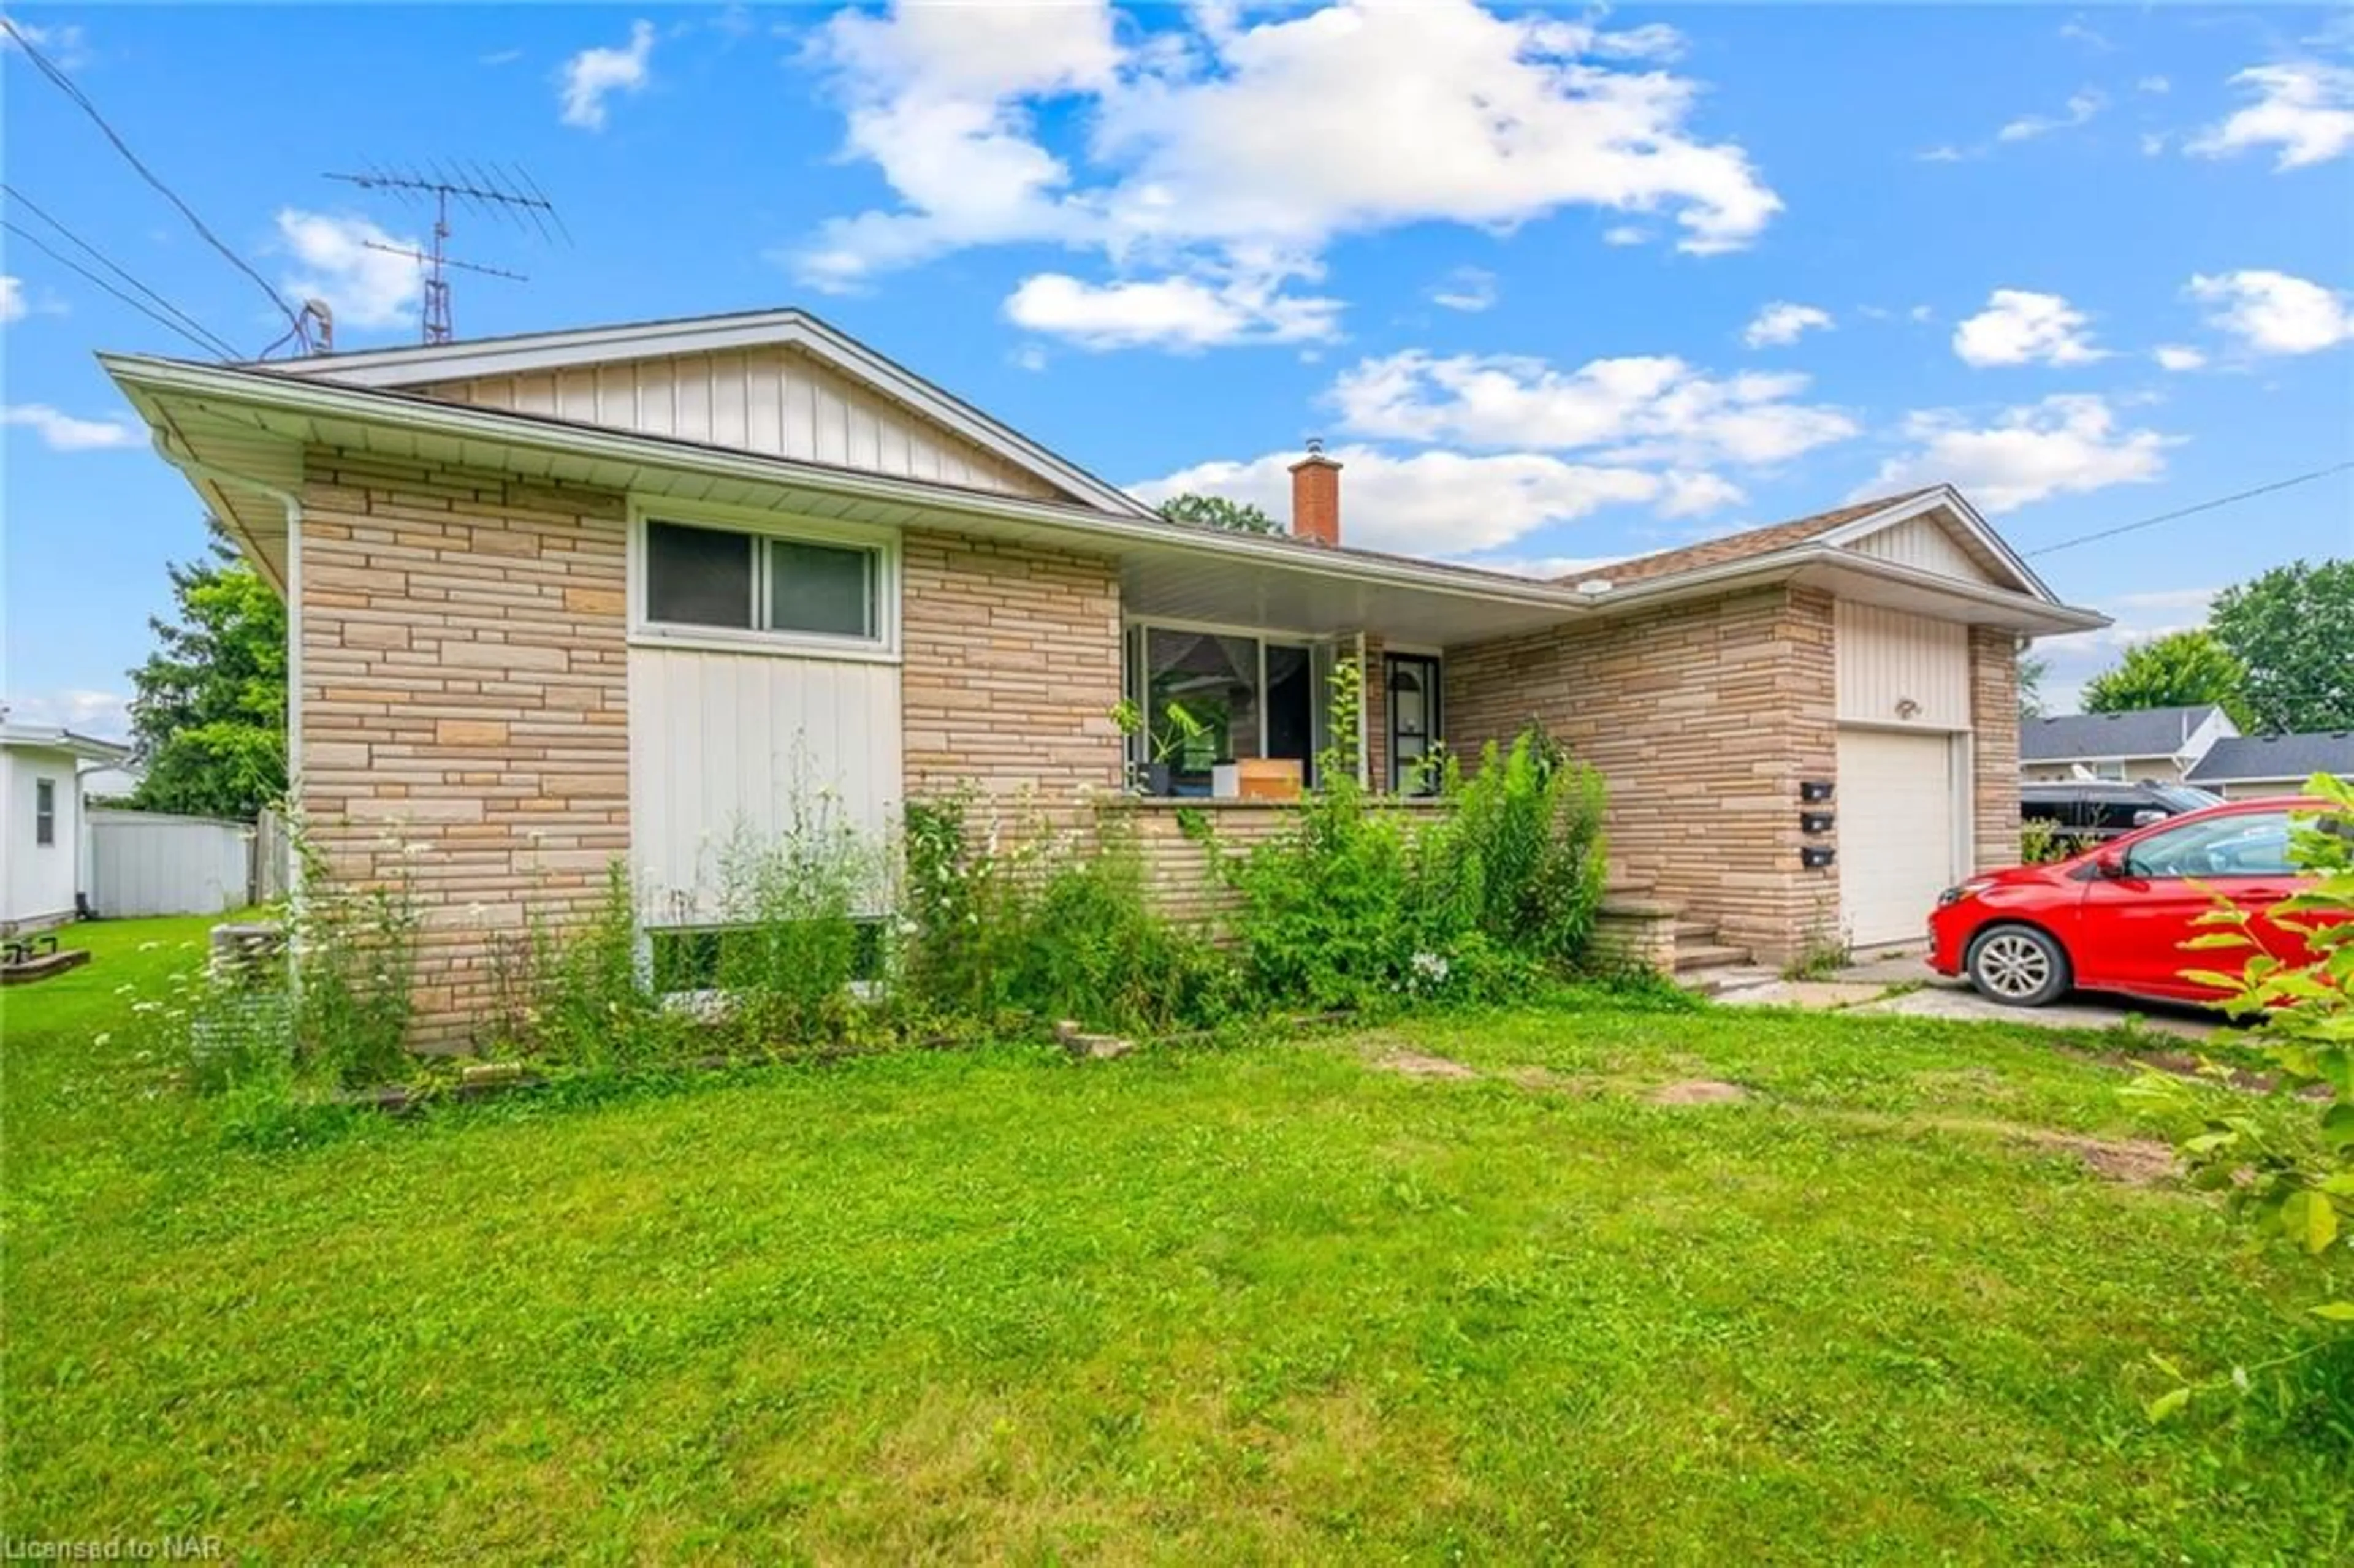 Frontside or backside of a home for 463 Clare Ave, Welland Ontario L3C 3B4